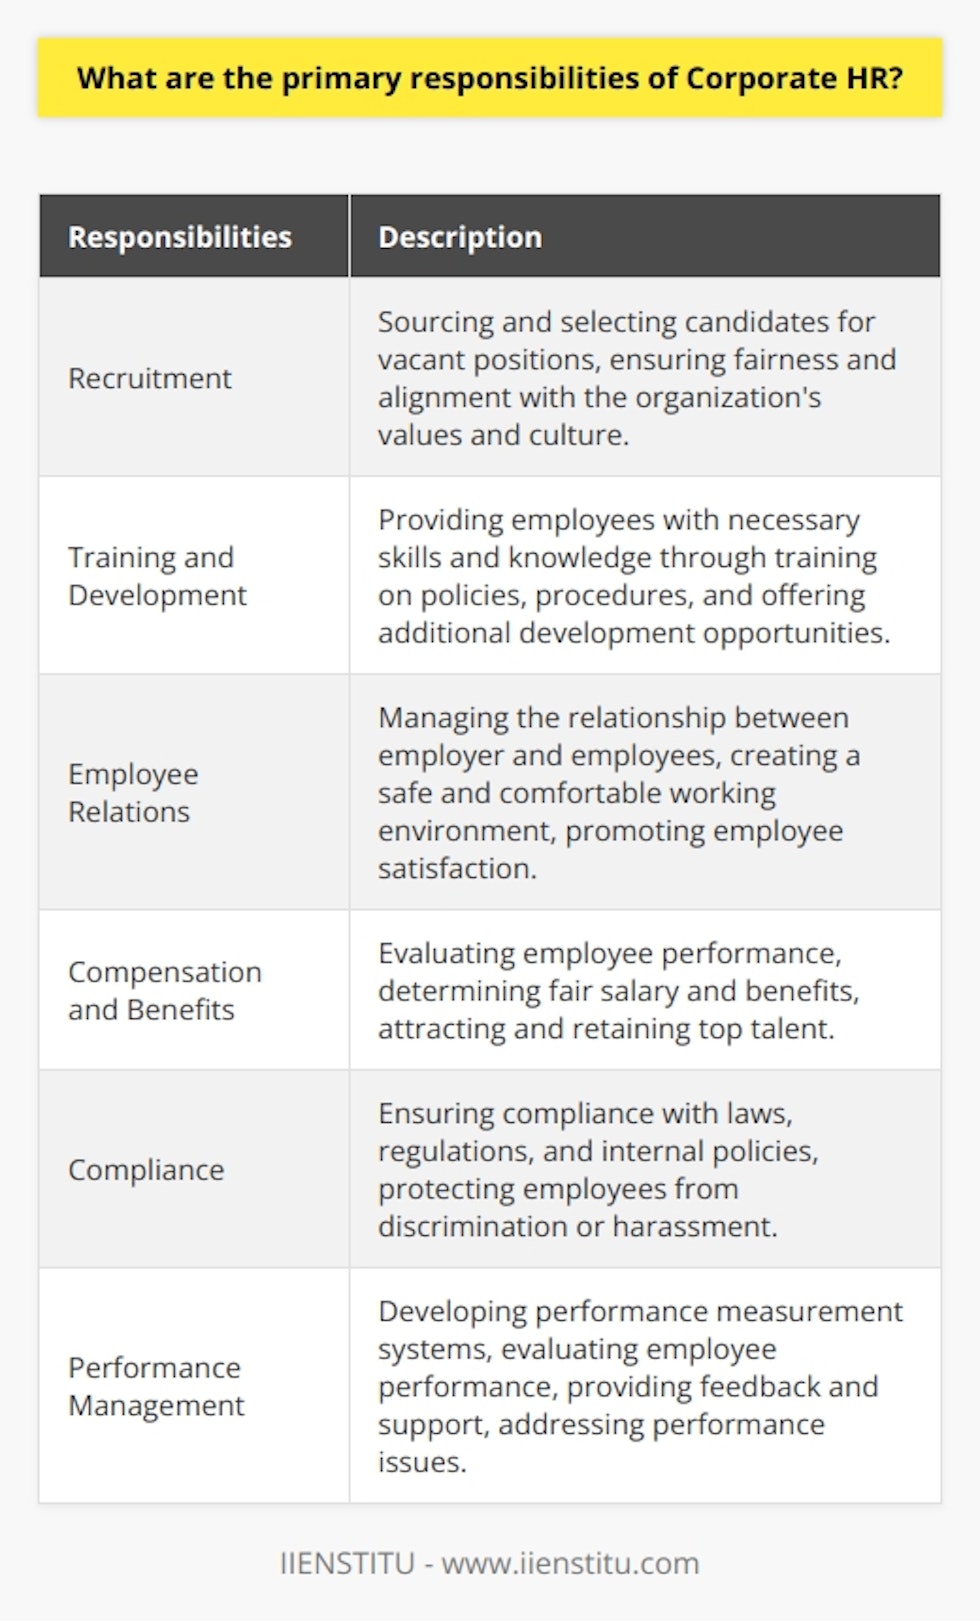 The importance of Human Resources (HR) in any organization cannot be overstated. In the corporate world, HR departments play a crucial role in ensuring the smooth functioning of the organization and the well-being of its employees. The primary responsibilities of Corporate HR include recruitment, training and development, employee relations, compensation and benefits, compliance, and performance management.Recruitment is one of the key responsibilities of Corporate HR. They are responsible for sourcing and selecting candidates to fill vacant positions within the organization. It is important for HR to ensure that the recruitment process is fair and unbiased, considering the needs of the organization. They also have to ensure that the individuals hired are well-suited for the role and align with the organization's values and culture.Training and development is another significant aspect of the Corporate HR function. HR professionals must ensure that employees receive the necessary skills and knowledge to perform their jobs effectively. This may include providing training on the organization's policies and procedures, as well as offering additional development opportunities such as workshops and seminars. By investing in the growth and development of employees, corporate HR contributes to the overall success of the organization.Employee relations is a critical responsibility of Corporate HR. They must manage the relationship between the employer and employees, ensuring that employees are treated fairly and equitably. HR professionals must create a safe and comfortable working environment and provide employees with the necessary resources to excel in their roles. Building positive employee relations not only fosters a healthy work environment but also enhances productivity and employee satisfaction.Compensation and benefits management is another crucial responsibility of Corporate HR. HR professionals must ensure that employees receive a fair and equitable compensation package. This includes evaluating employee performance and determining appropriate salary and benefits for each individual. By implementing a comprehensive and competitive compensation and benefits program, Corporate HR can attract and retain top talent.Compliance is a significant area of responsibility for Corporate HR. They must ensure that the organization complies with all relevant laws, regulations, and internal policies and procedures. This includes protecting employees from any form of discrimination or harassment and providing them with adequate support and protection. By maintaining compliance, Corporate HR enables a fair and inclusive work environment.Performance management is another vital responsibility of Corporate HR. They must develop and implement performance measurement systems and evaluate employee performance. HR professionals are also responsible for providing feedback and support to employees, ensuring their success, and addressing any performance issues promptly and effectively. By focusing on performance management, Corporate HR contributes to the growth and success of individual employees and the organization as a whole.In summary, Corporate HR has a wide range of responsibilities that are crucial for the success of an organization. From recruitment and training to employee relations, compensation and benefits, compliance, and performance management, HR plays a pivotal role in optimizing operations and supporting the development and well-being of employees. By implementing effective HR strategies, organizations can create a positive work environment and achieve their goals efficiently.